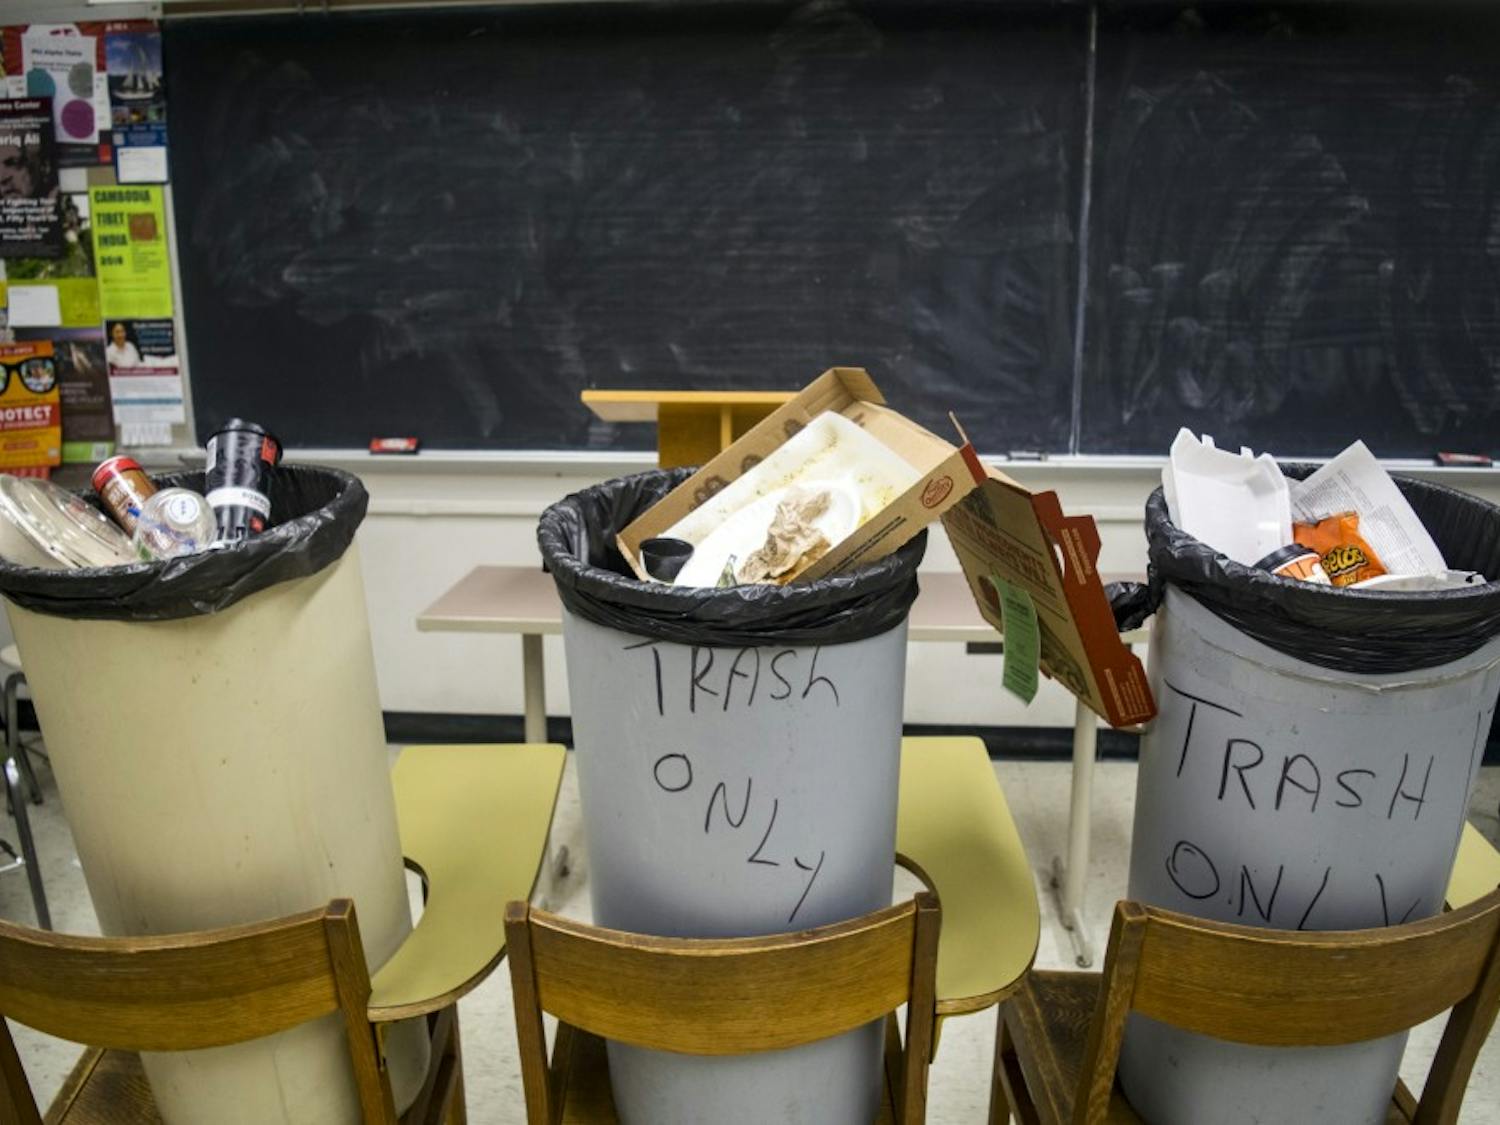 In 2017, significantly less waste was recycled than taken to the landfill as trash. UW-Madison attempts to move away from this toward a sustainable campus in part by relying on students to drop waste in the correct bins.&nbsp;